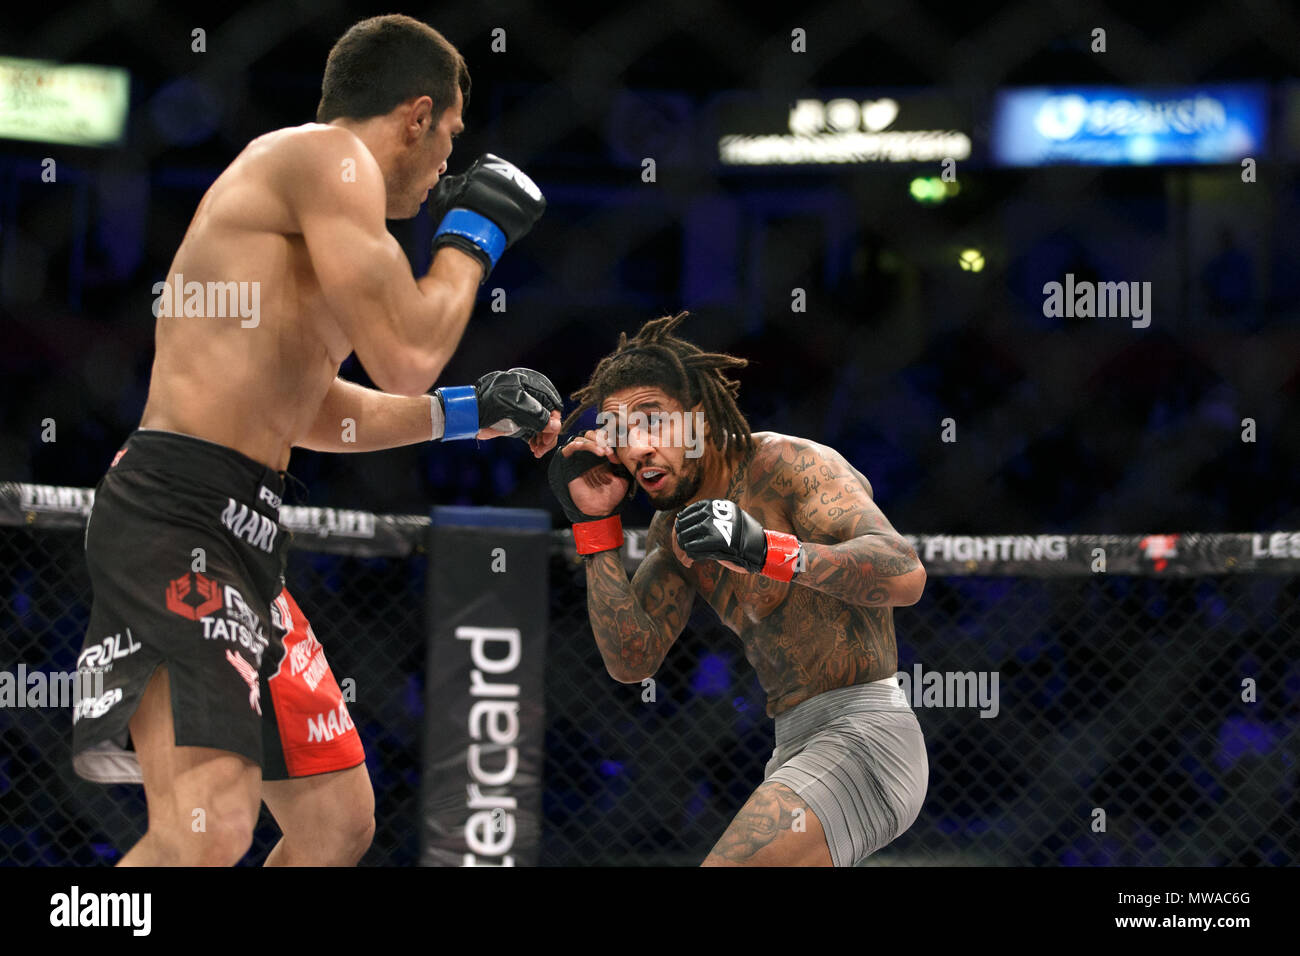 Aurel Pirtea (left) versus Saul Rogers (right) at ACB 54 in Manchester, UK. Pirtea won their lightweight class fight by submission. Absolute Championship Berkut, Mixed Martial Arts, MMA fight. Stock Photo